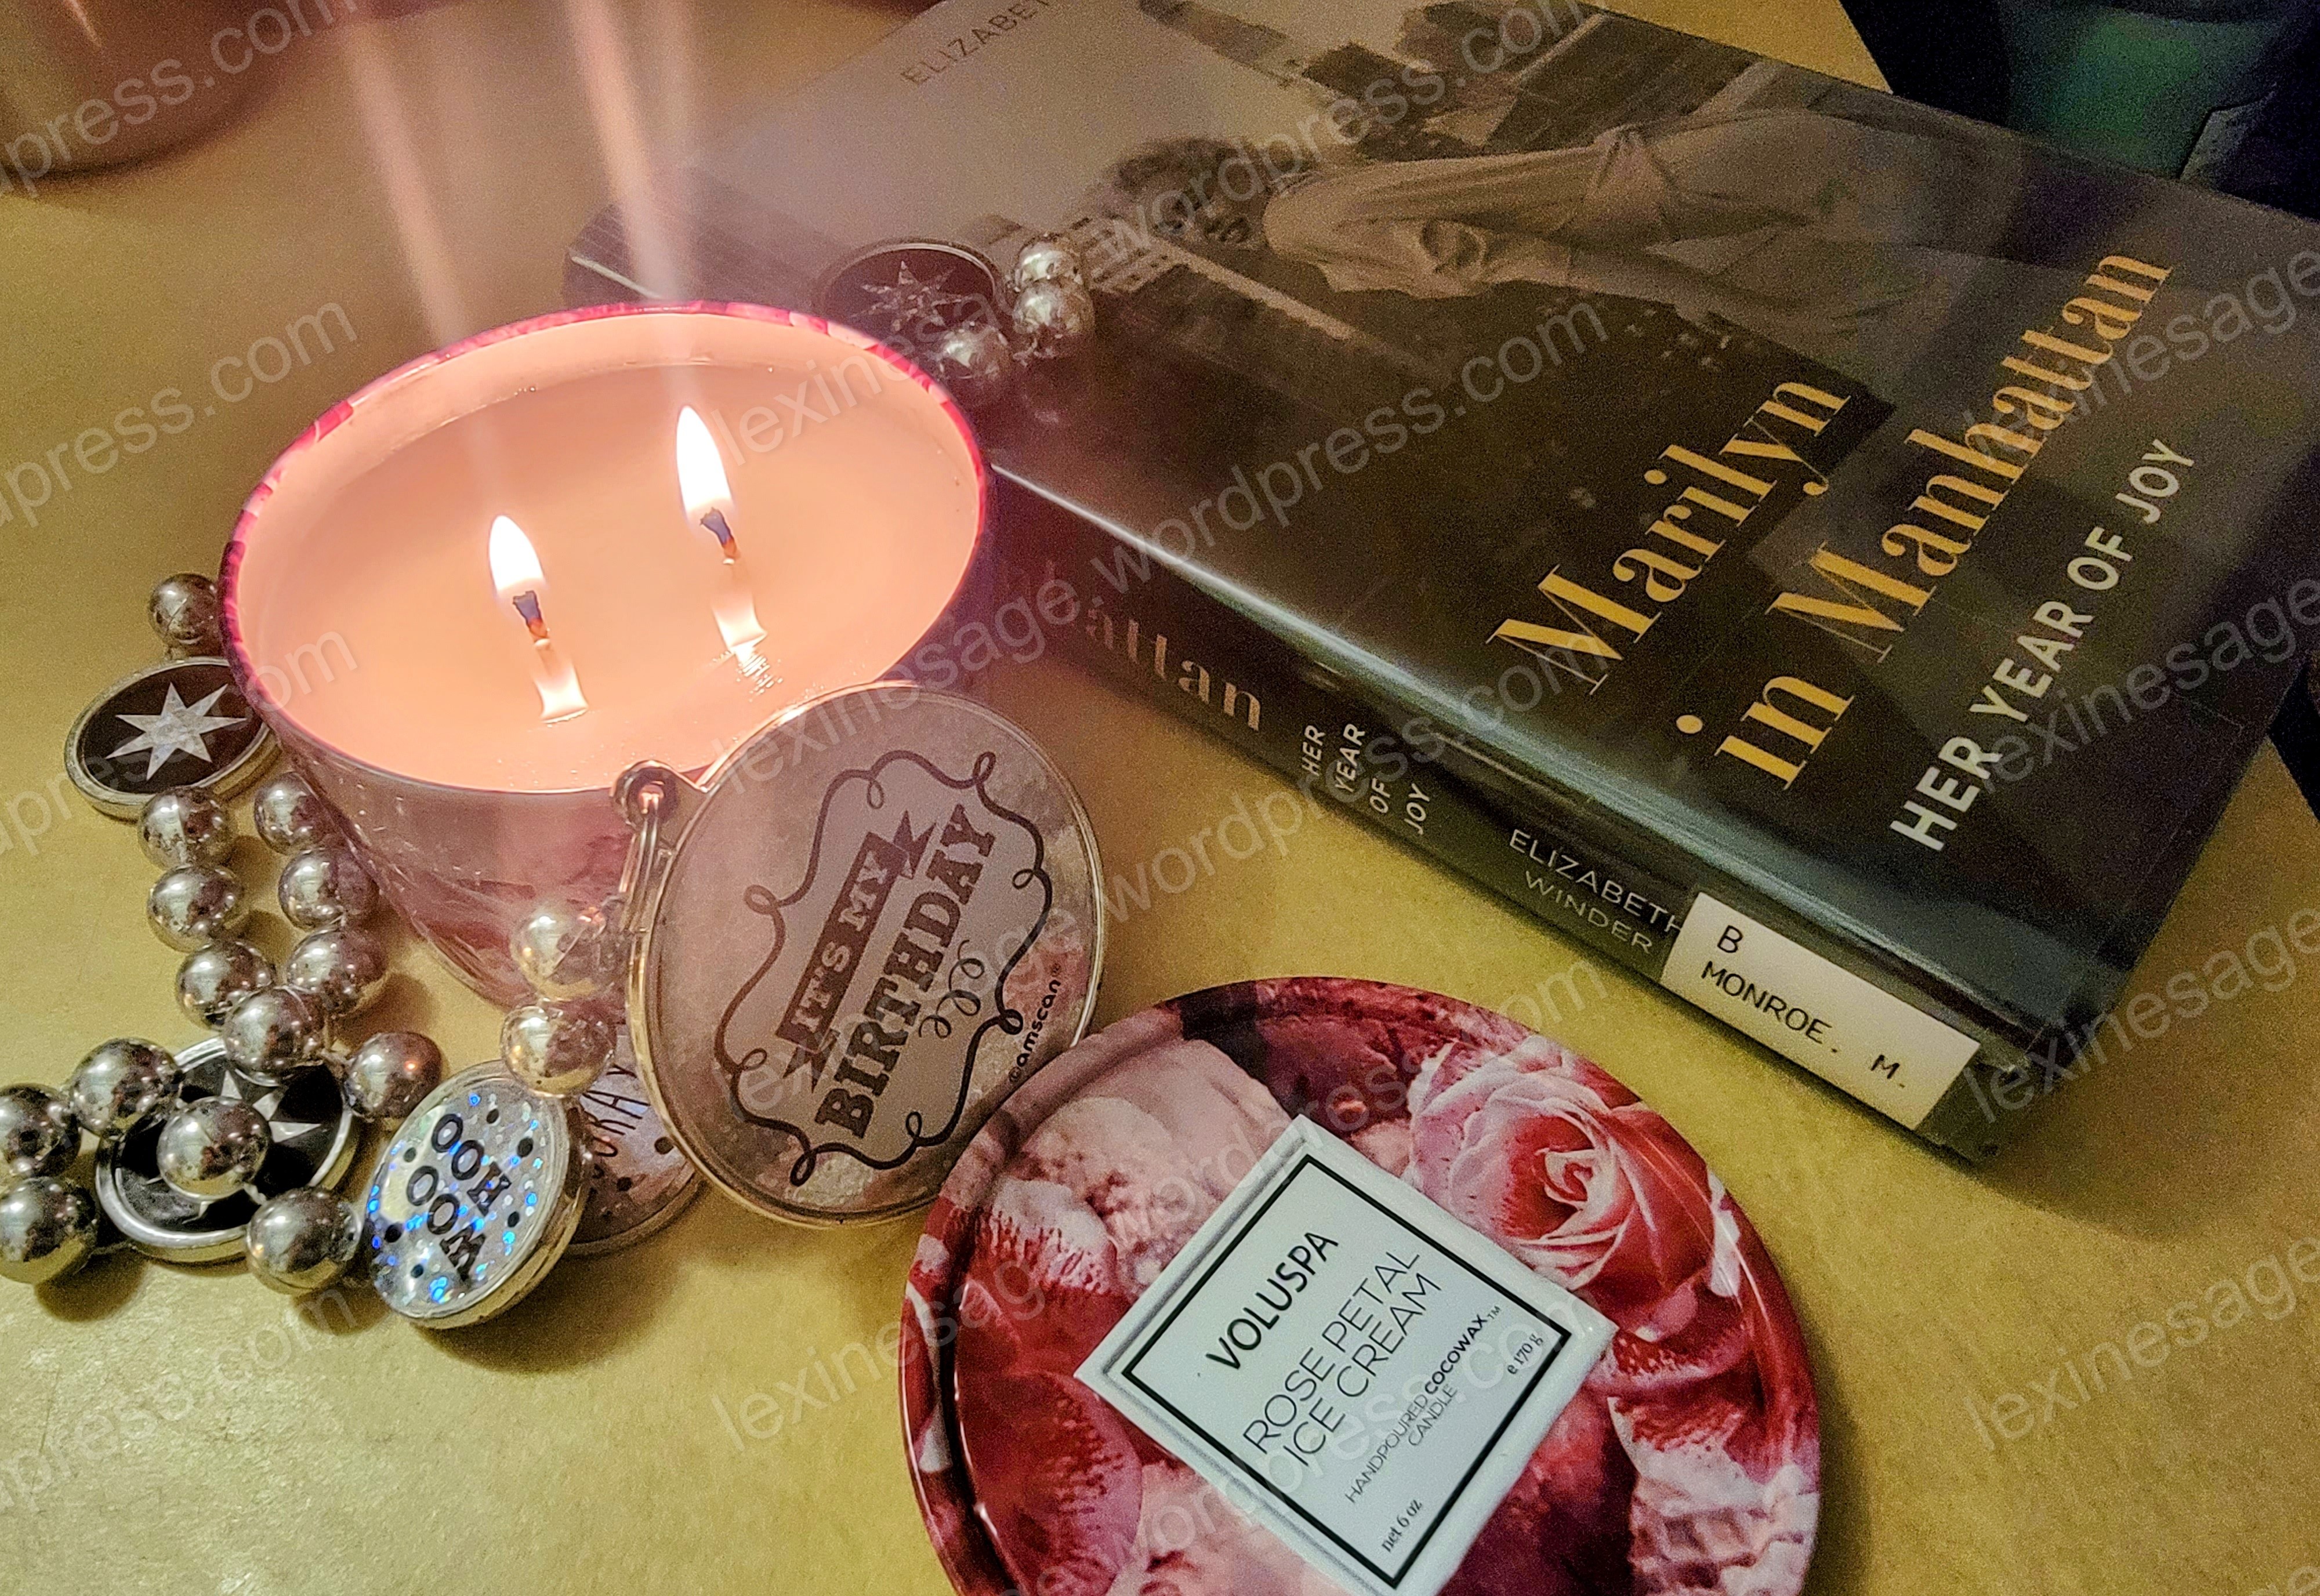 new candle + book 2